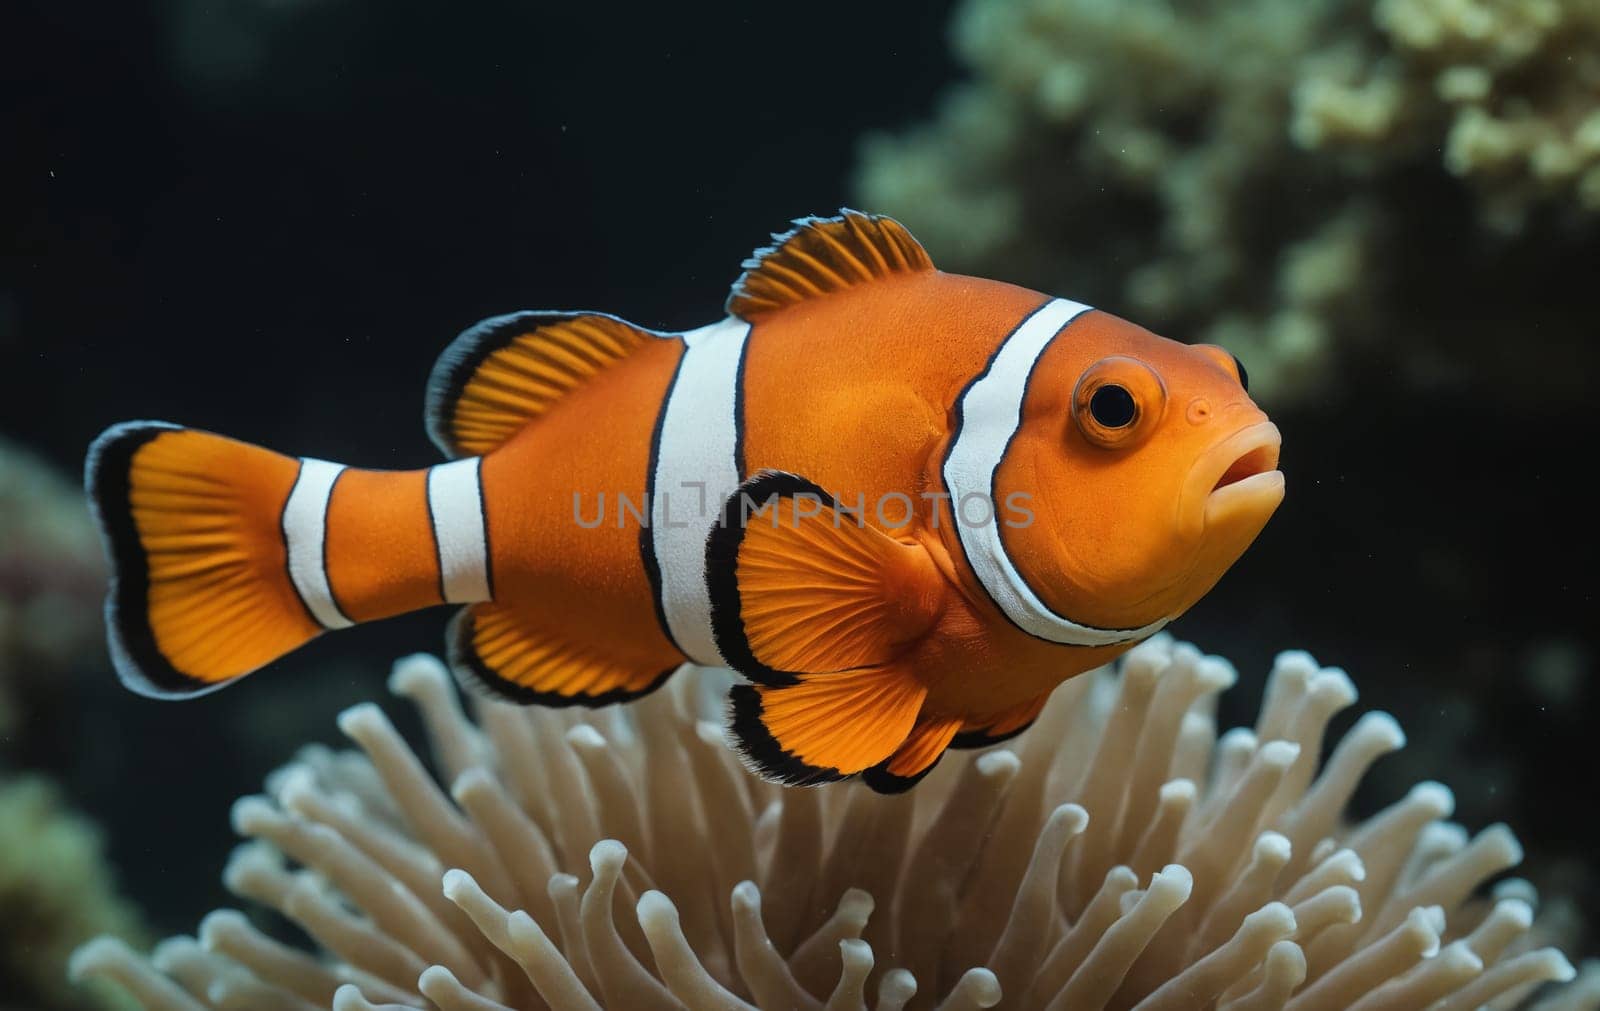 The clownfish, a type of anemone fish, is swimming gracefully on top of a coral reef in its natural underwater habitat. This vertebrate organism belongs to the rayfinned fish group in marine biology